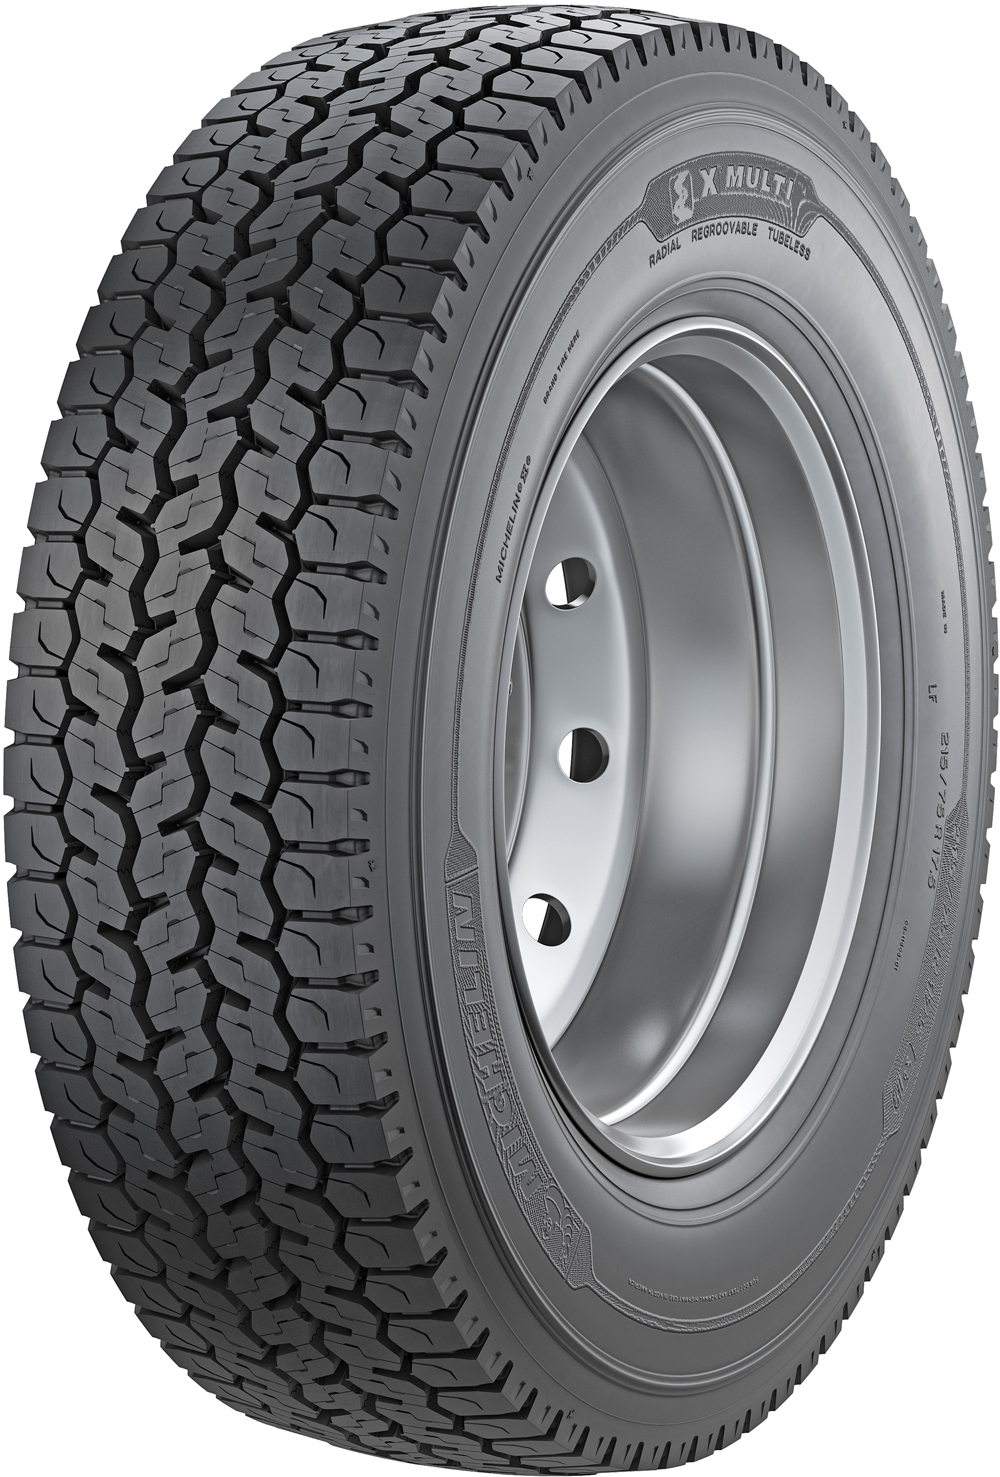 product_type-heavy_tires MICHELIN X MULTI D VG 215/75 R17.5 126M